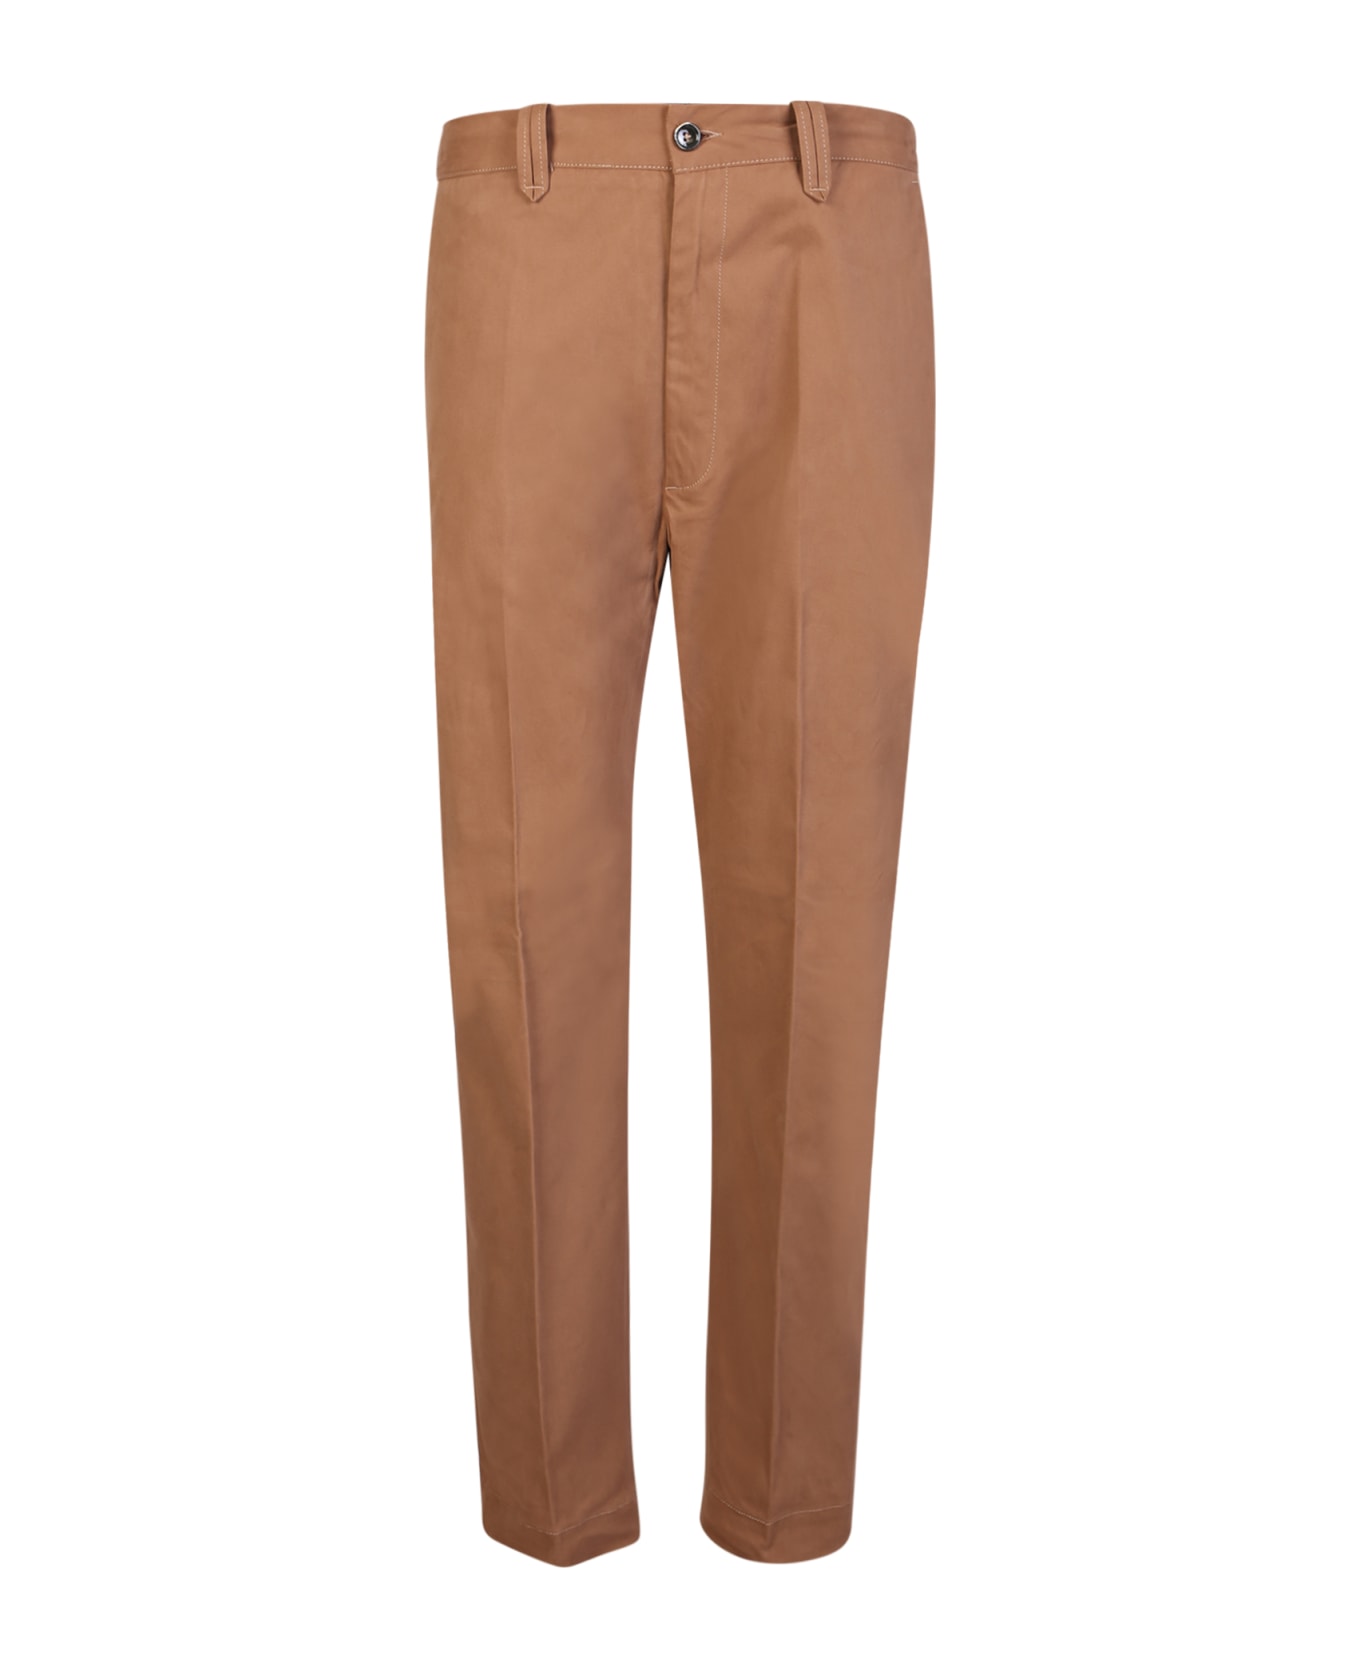 Nine in the Morning Bisquit Yoga Trousers - Beige